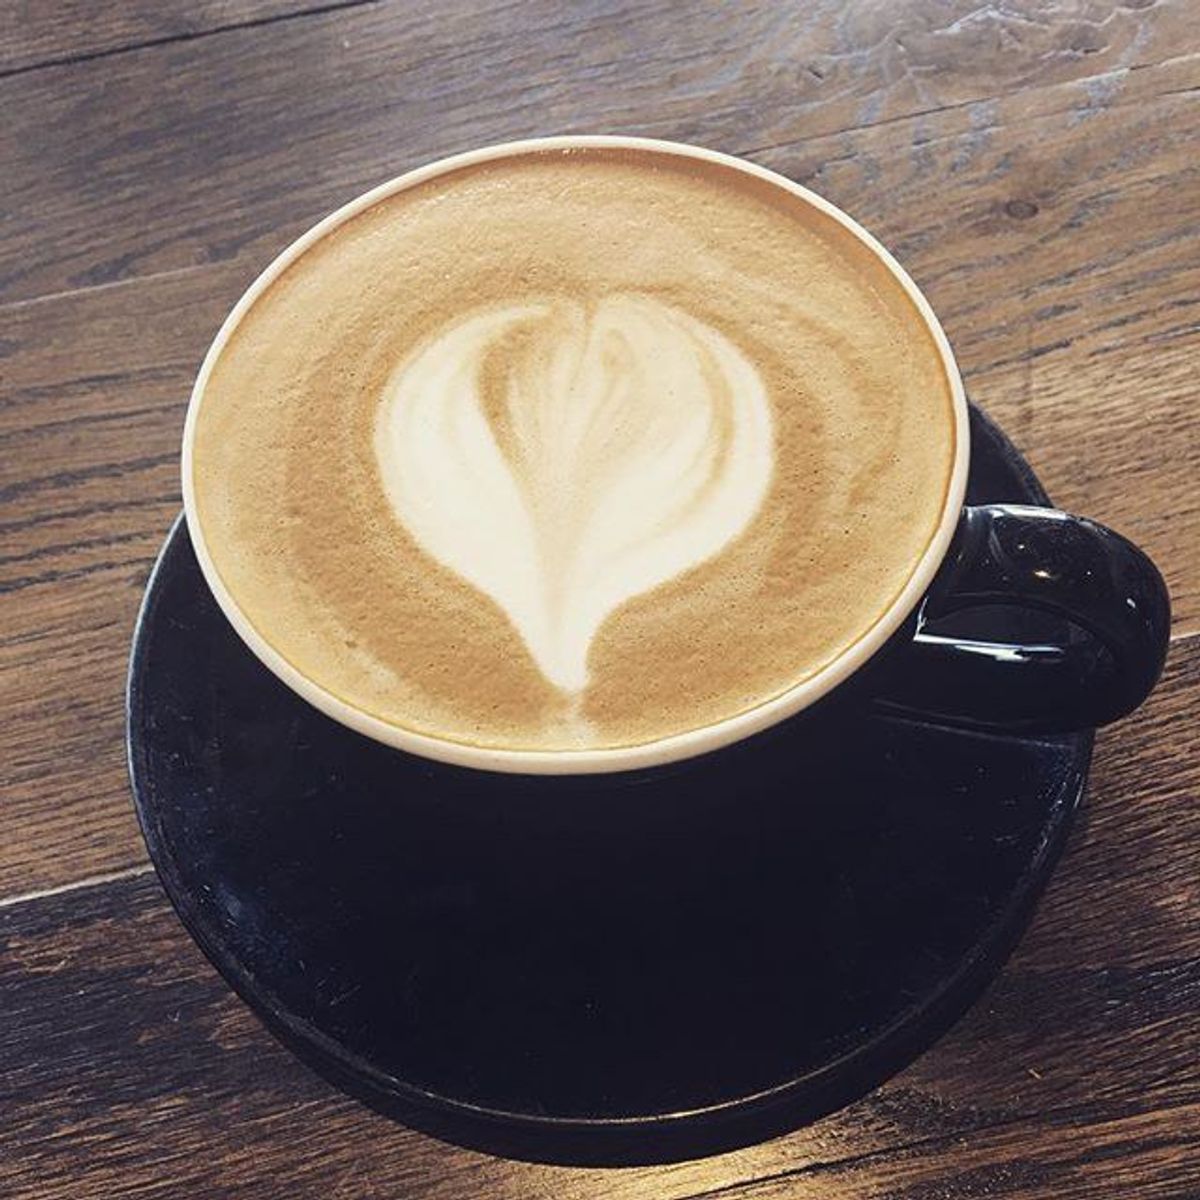 The Best Coffee Shops In Tulsa